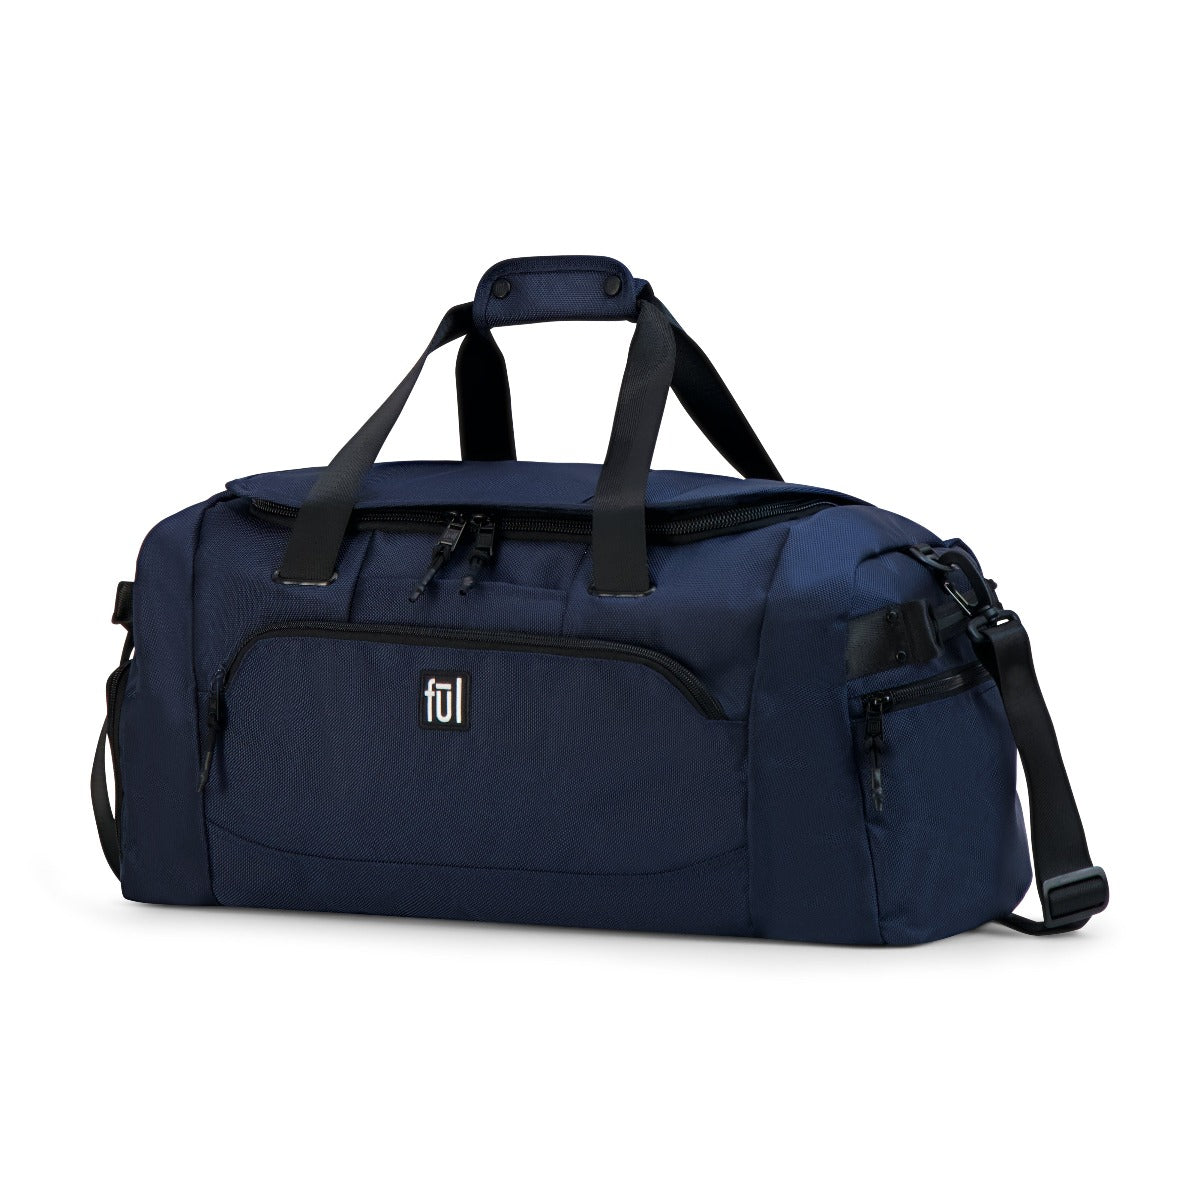 ful tactics collection siege duffle bag navy blue - best gym duffel bags